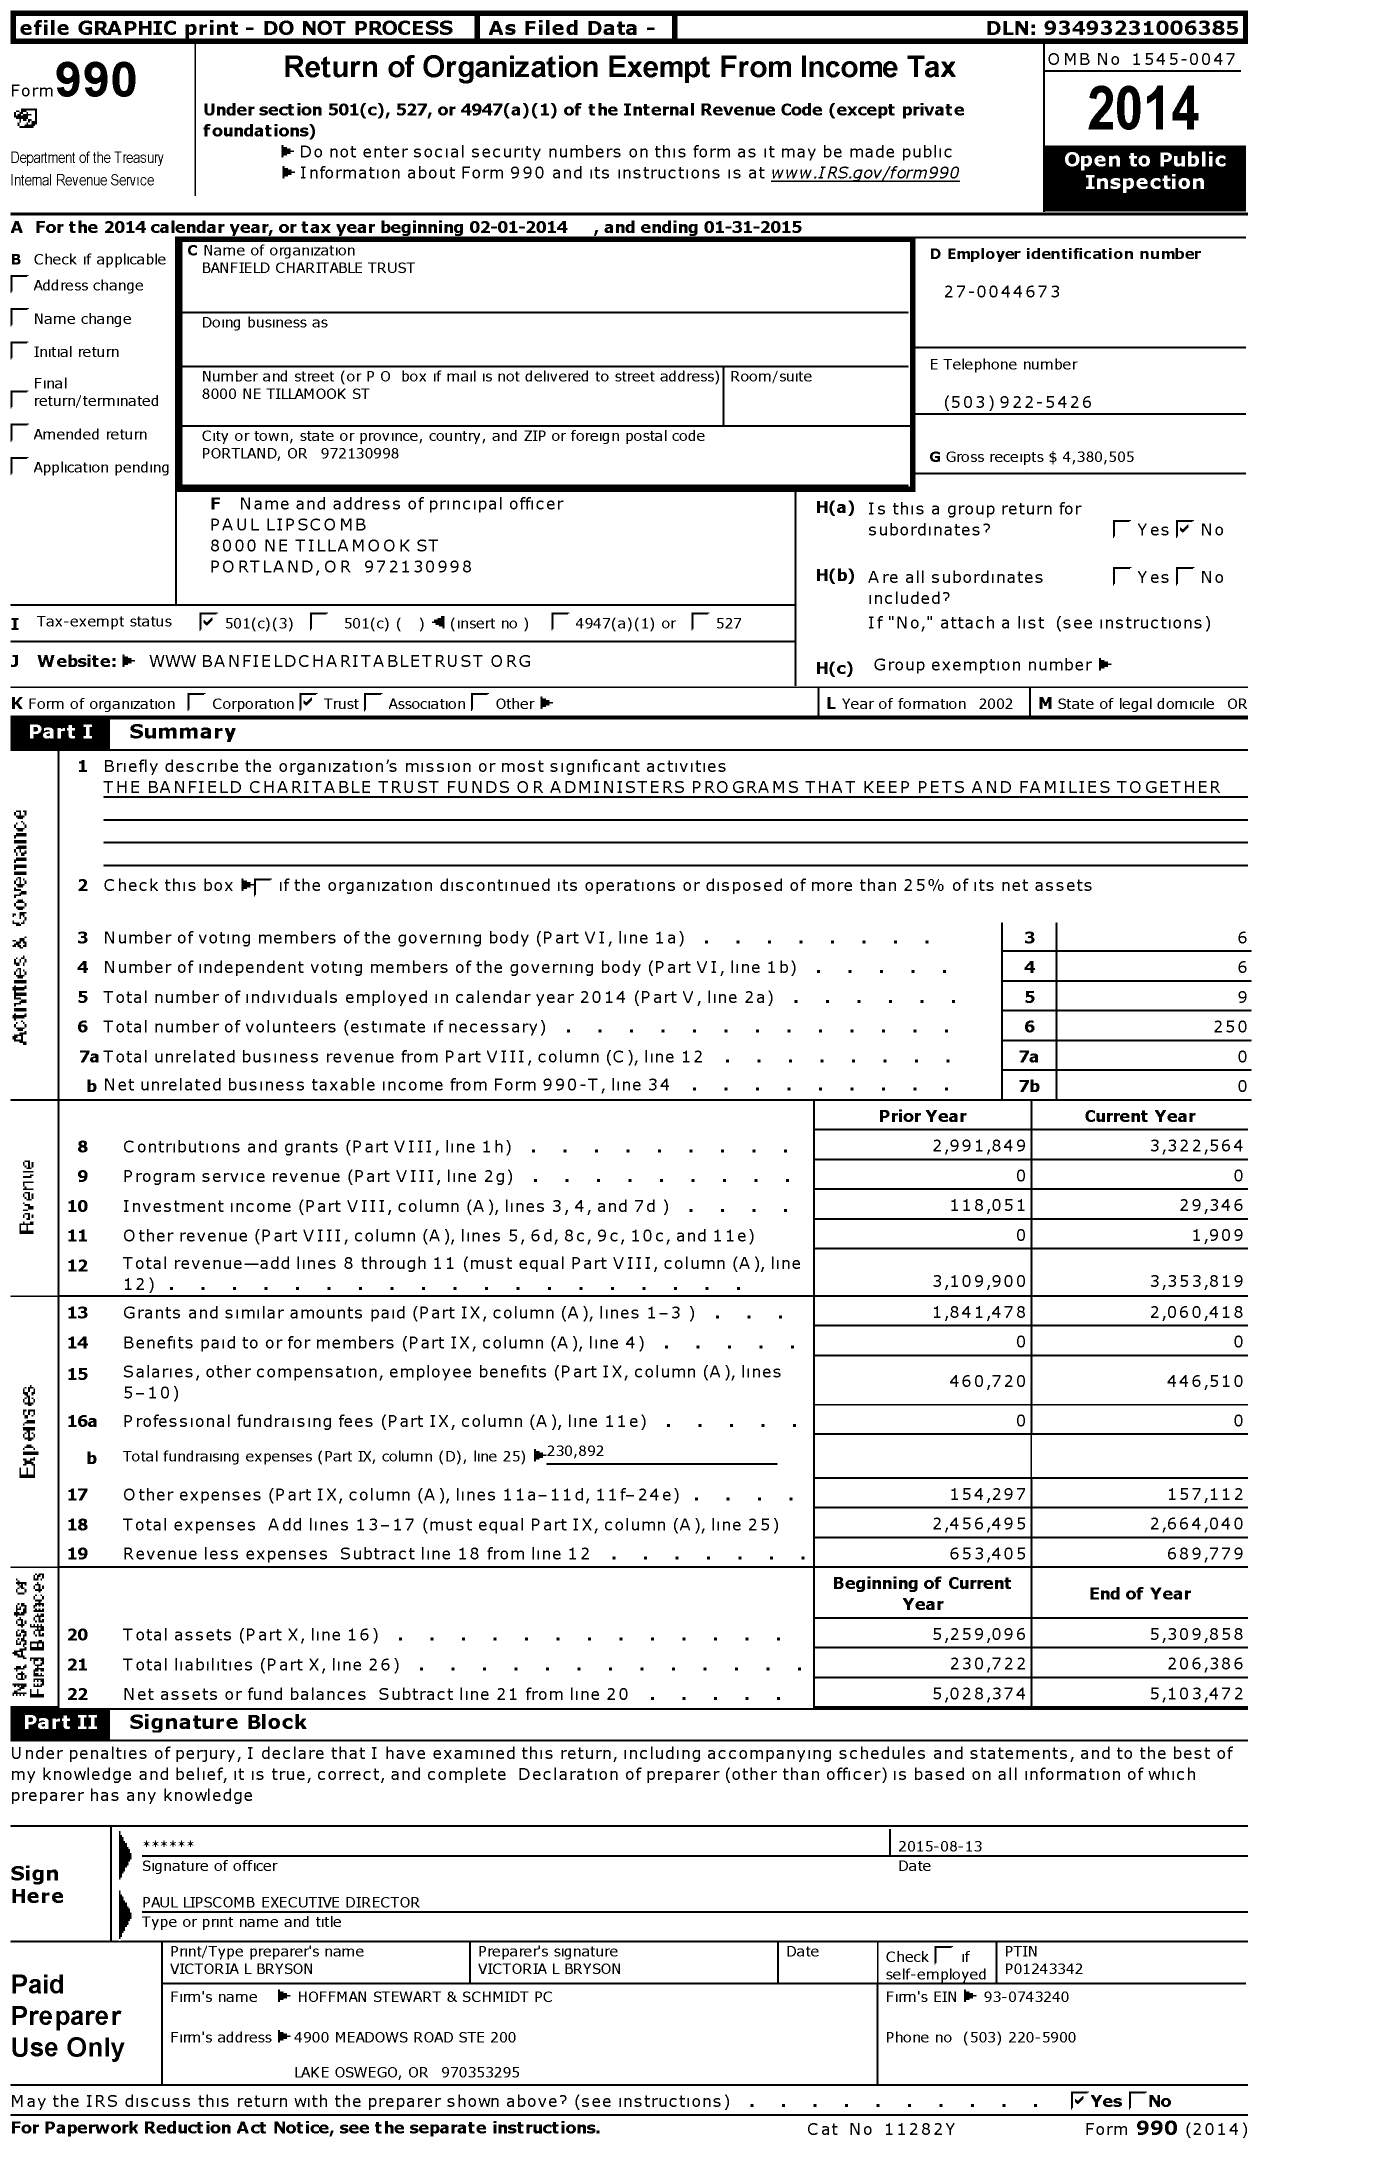 Image of first page of 2014 Form 990 for Banfield Charitable Trust (BCT)